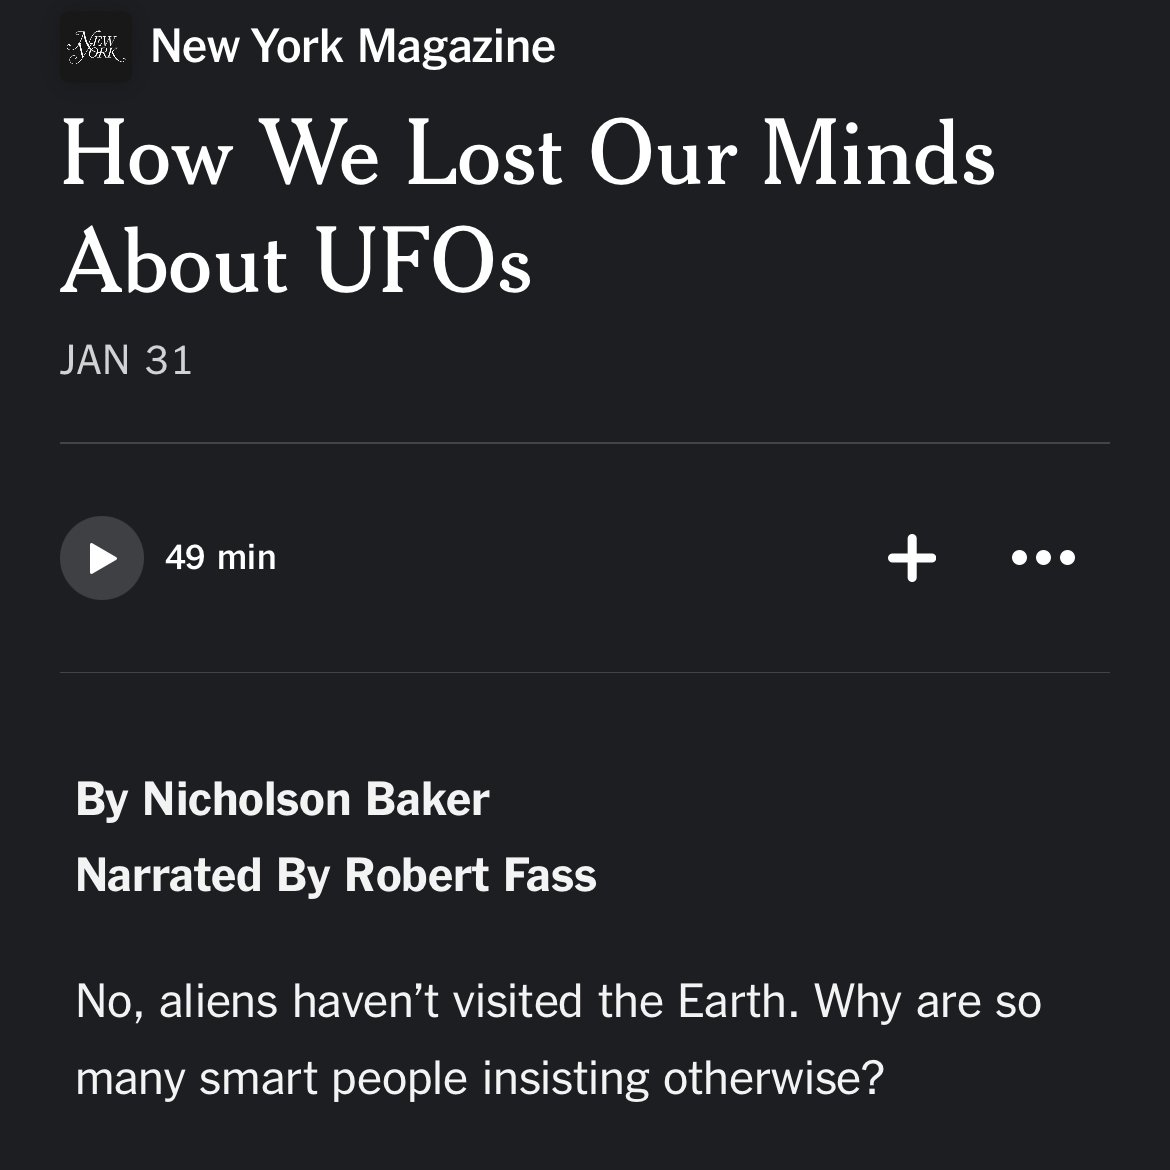 Calling All Saucerheads! This @NYMag article by acclaimed author @nicholsonbaker8 just dropped on the @NYTAudioApp ... in which he does some serious debunking of #Roswell, #Area51, and a lot of other #UFO legends and lore I really enjoyed narrating this one! 🛸👽🛸👾👾👾